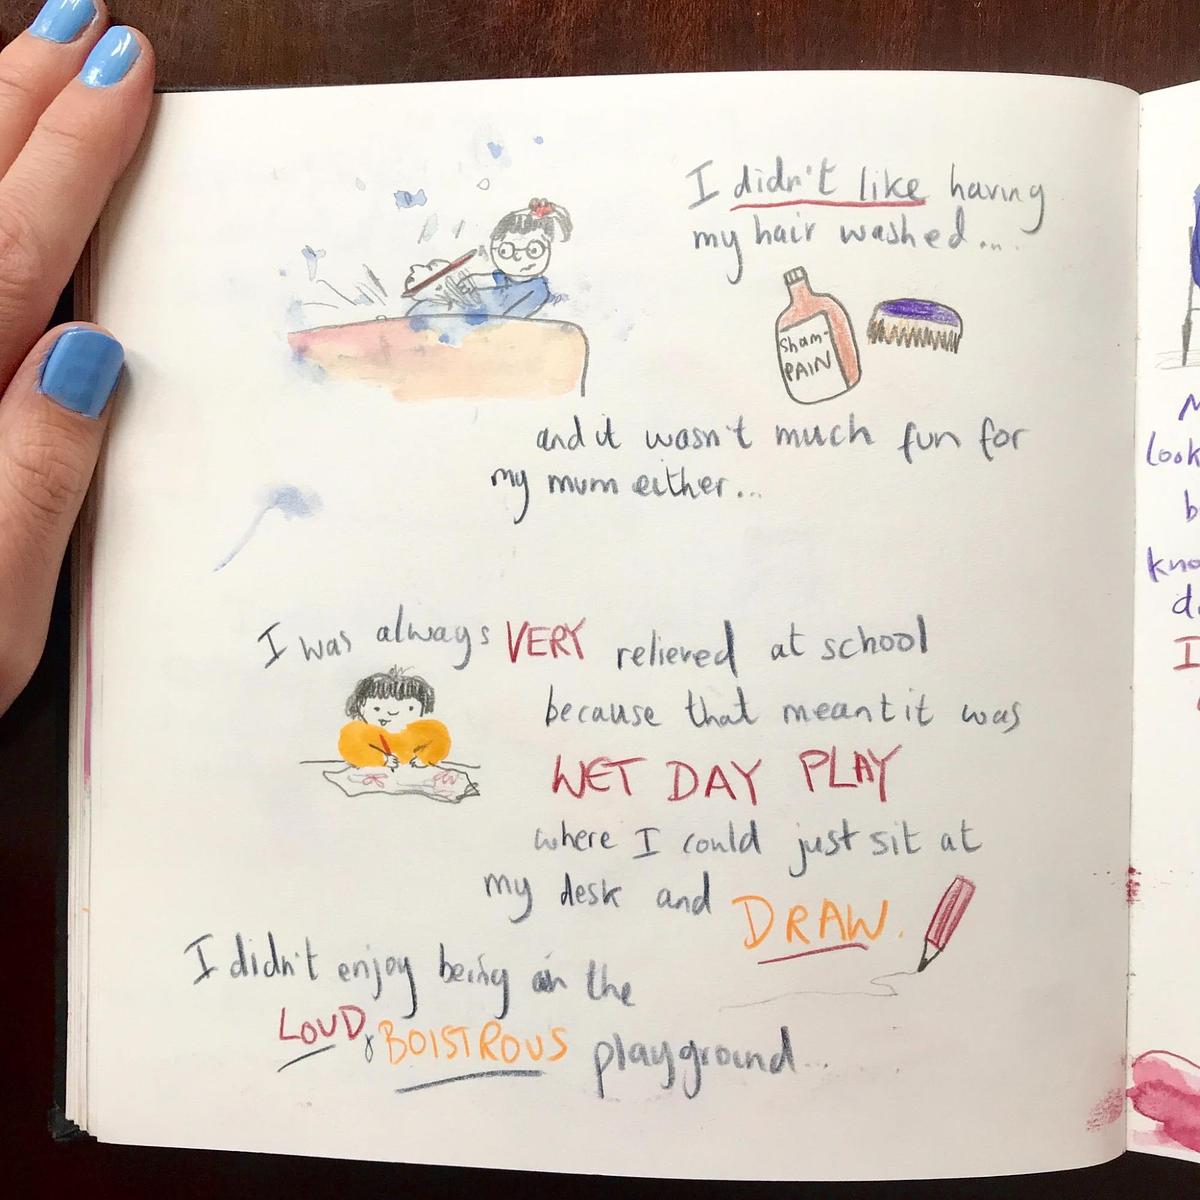 Photo of diary with hand written drawings and illustrations